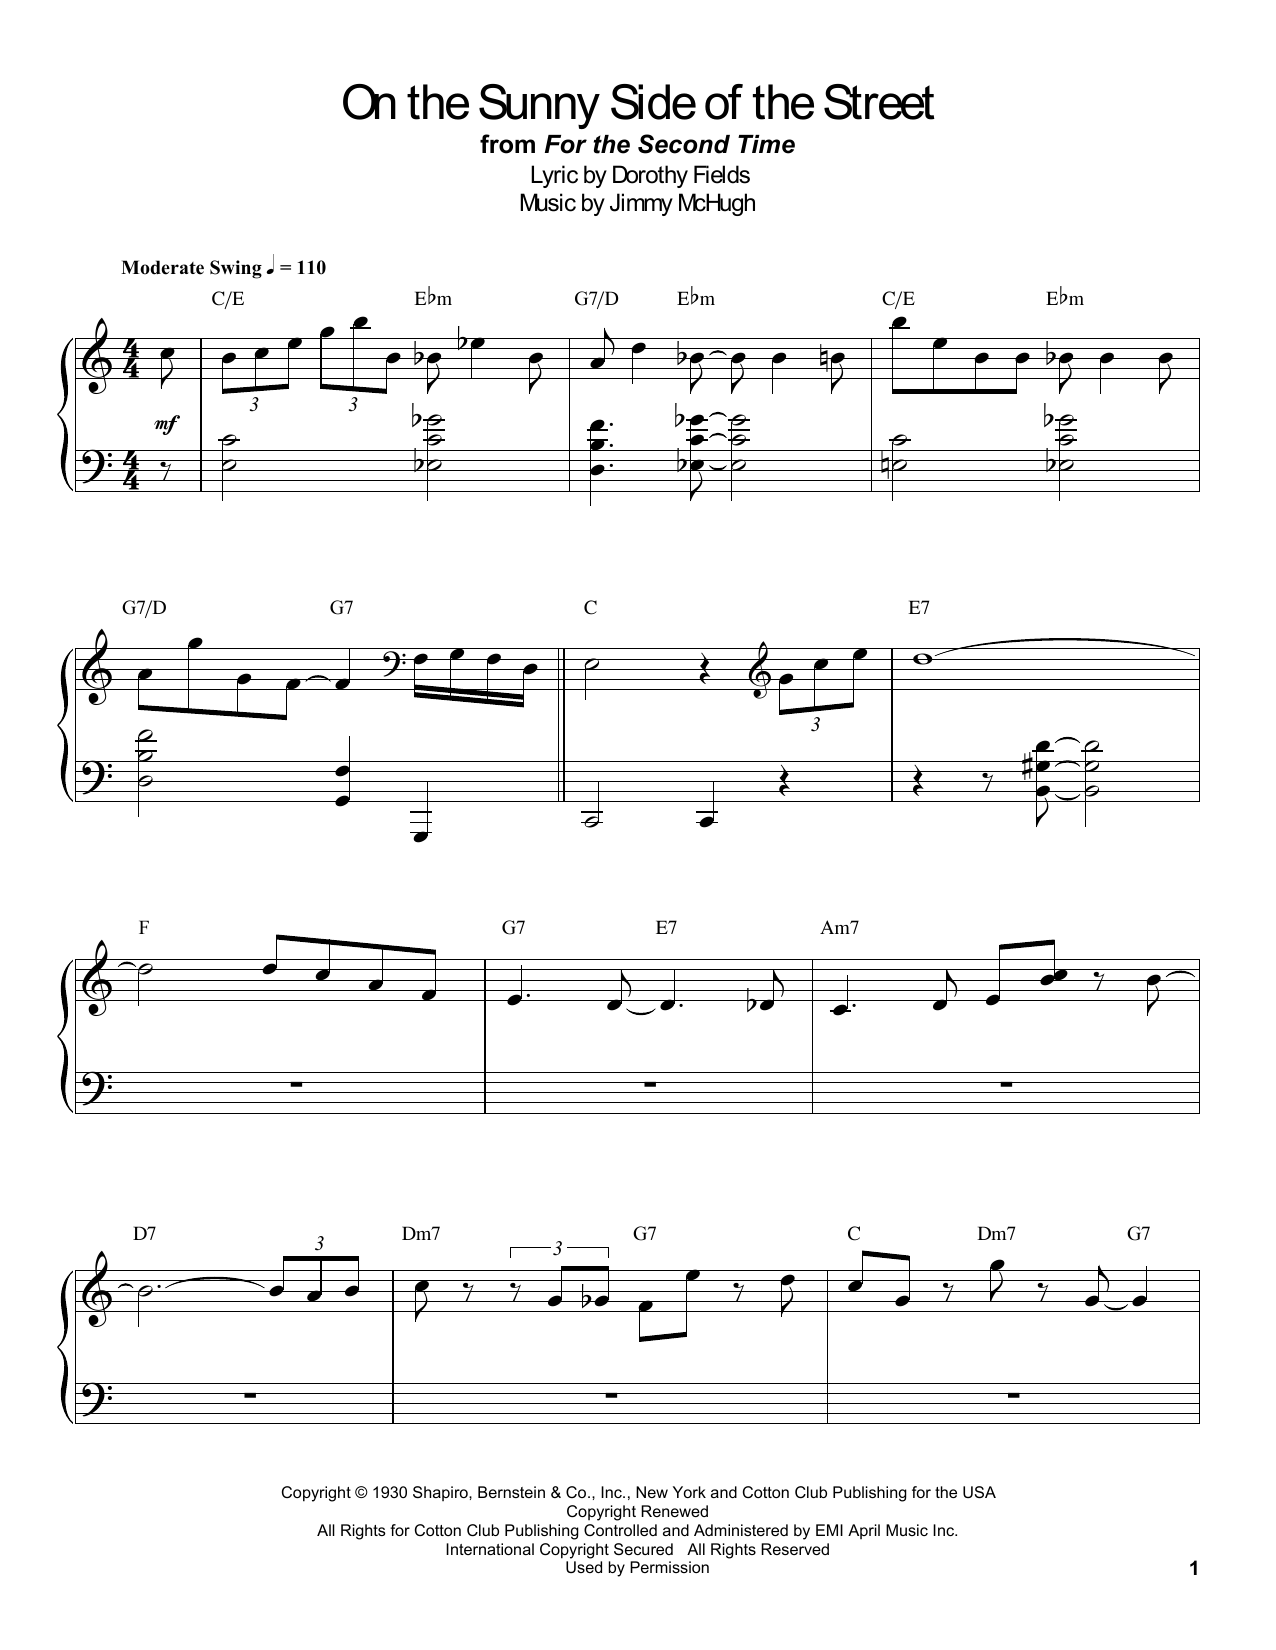 Count Basie On The Sunny Side Of The Street Sheet Music Download Pdf Score